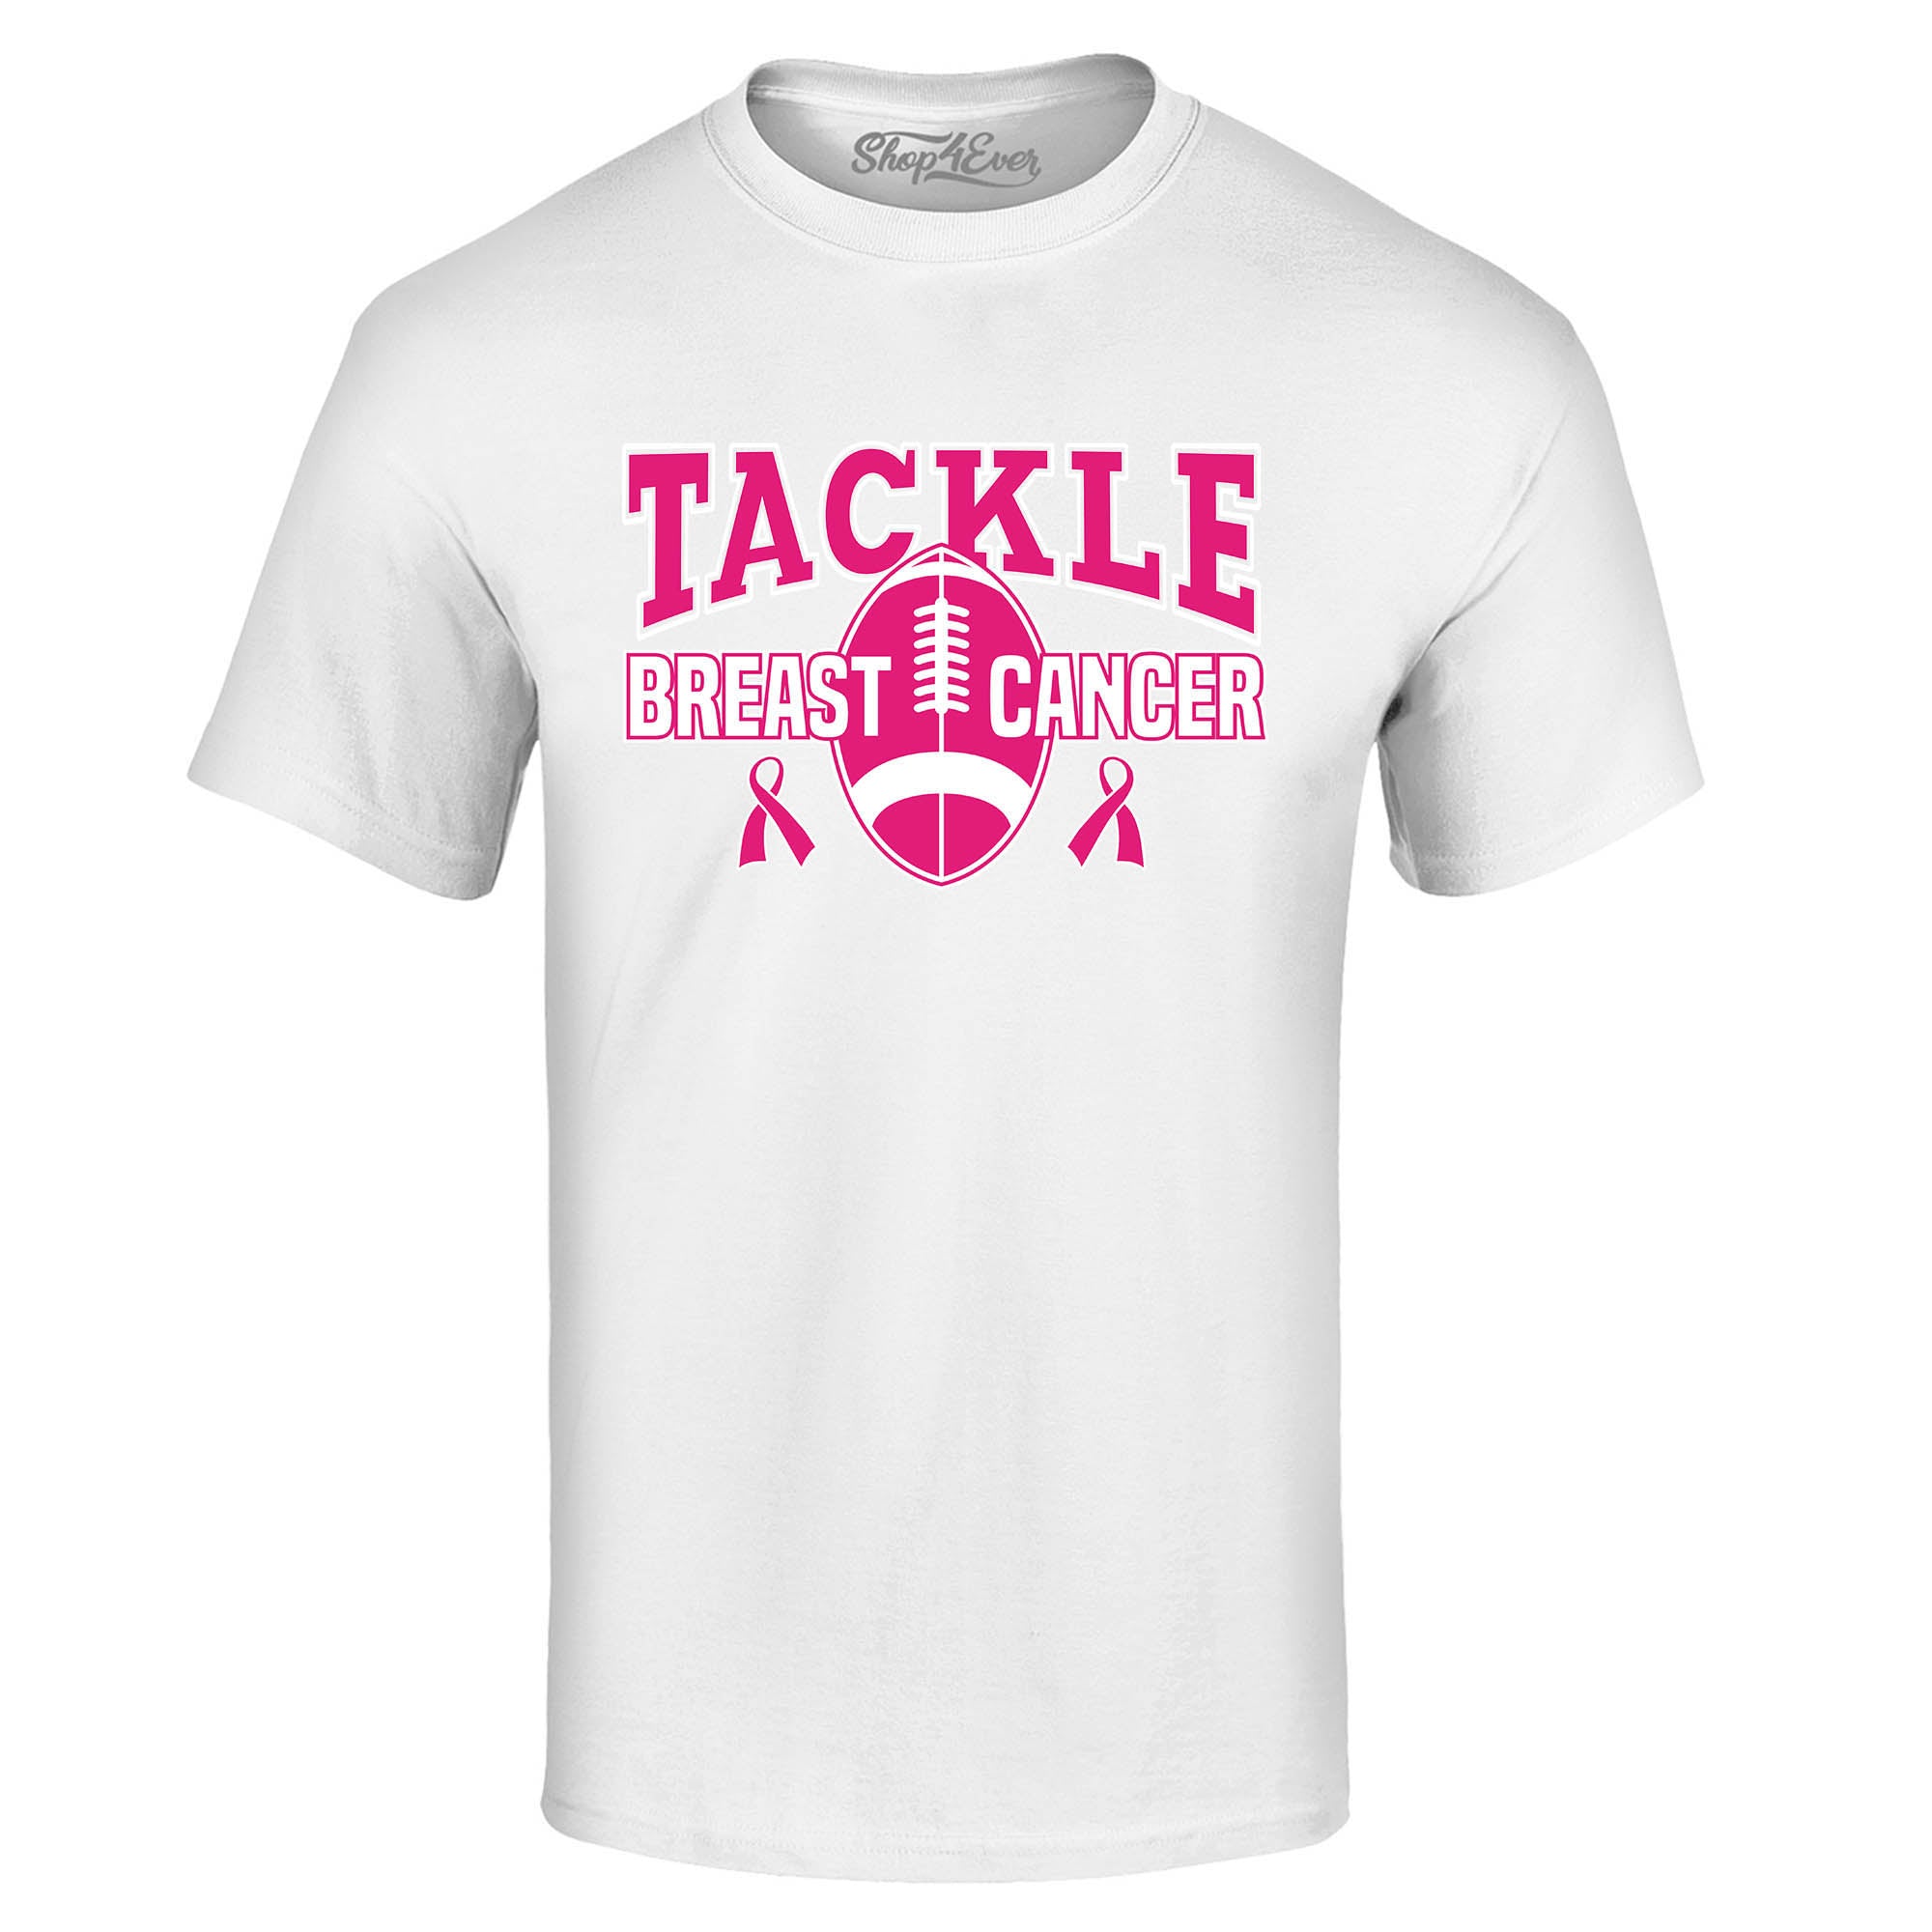 Tackle Breast Cancer Awareness T-Shirt Support